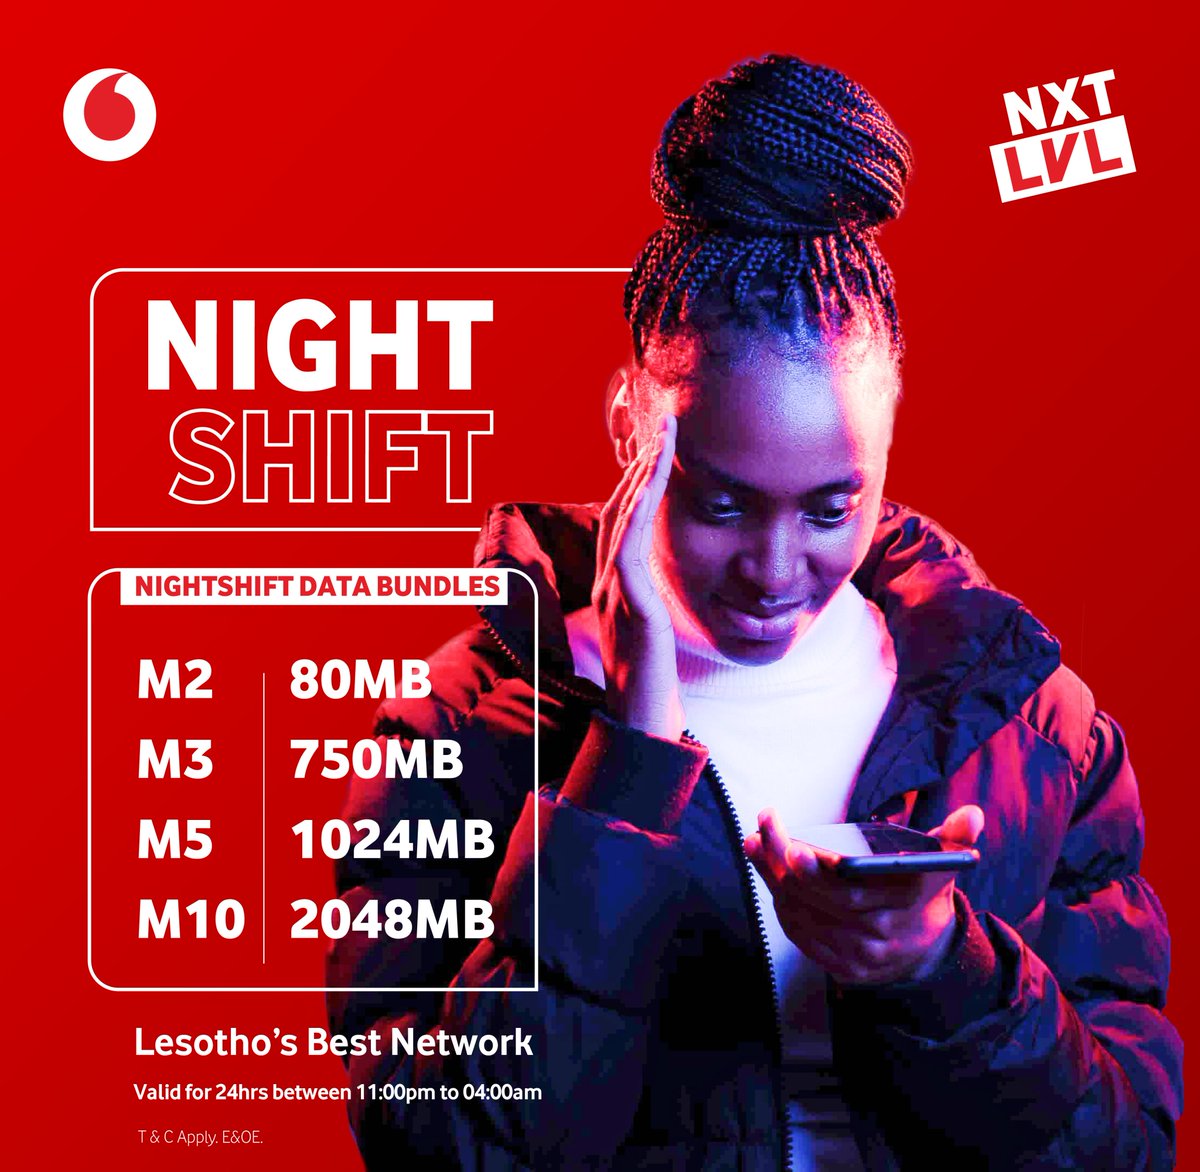 Make the most of your night with our data bundles! Stay connected, productive, and entertained all night long! 📱🌙 Dial *114*36# & subscribe to NXT LVL. T's&C's #NXTLVL #Under25s #Lstwitter